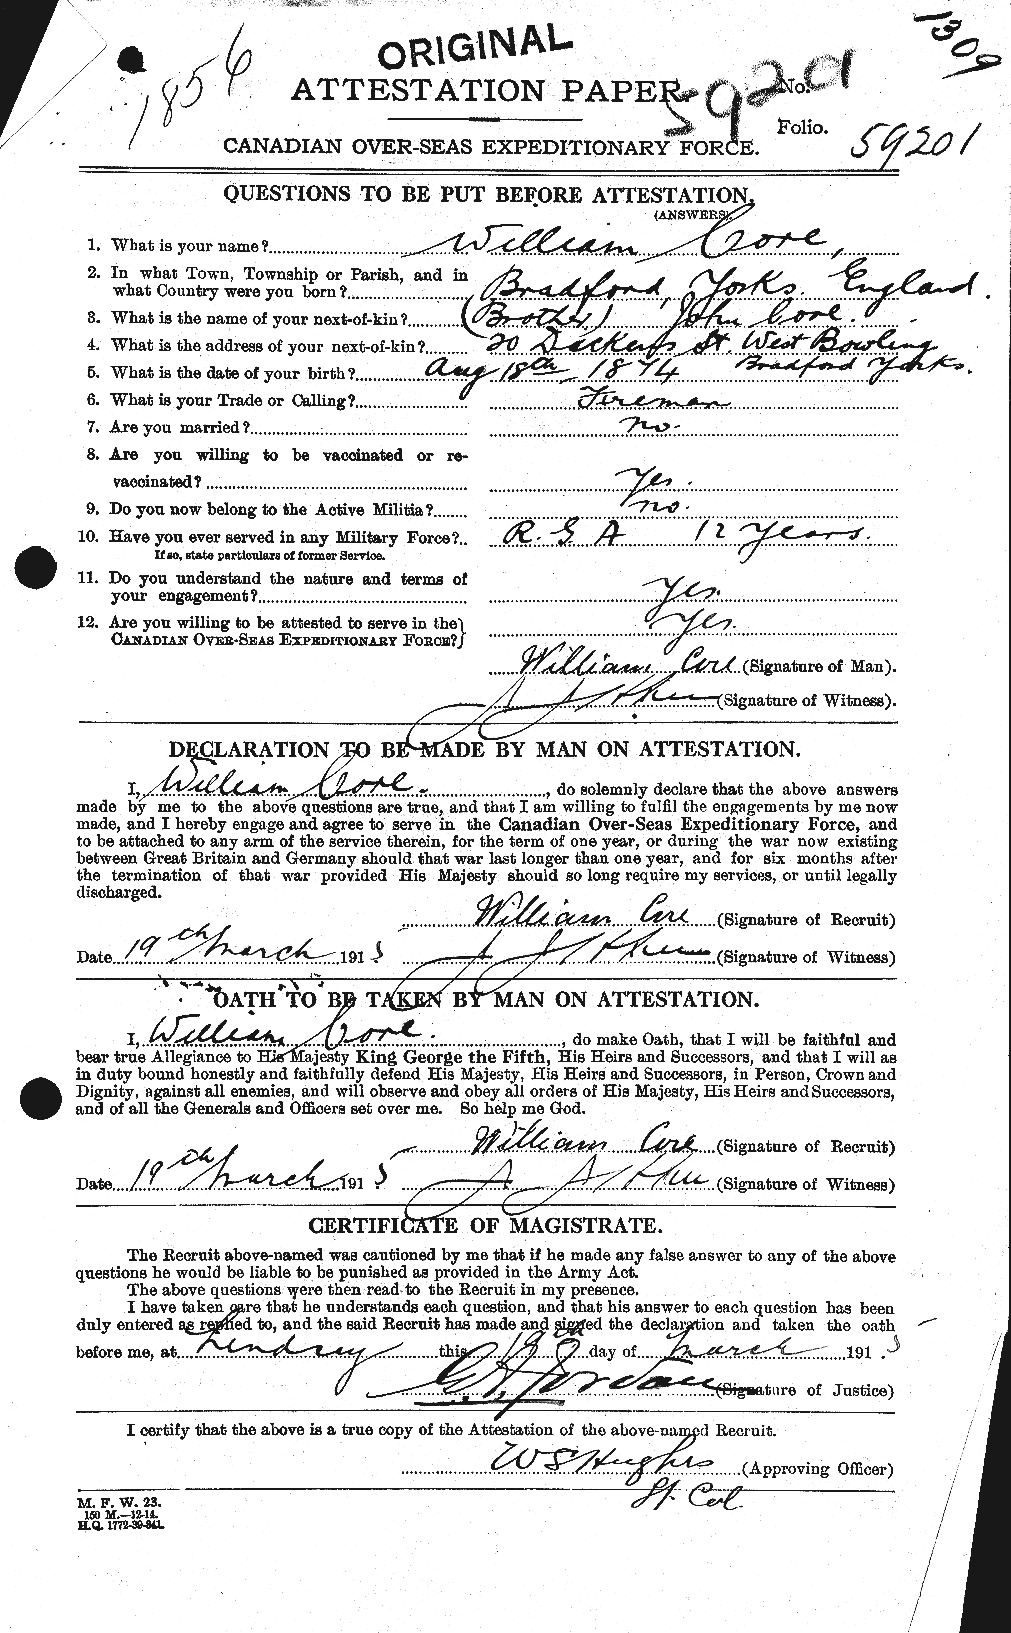 Personnel Records of the First World War - CEF 054706a